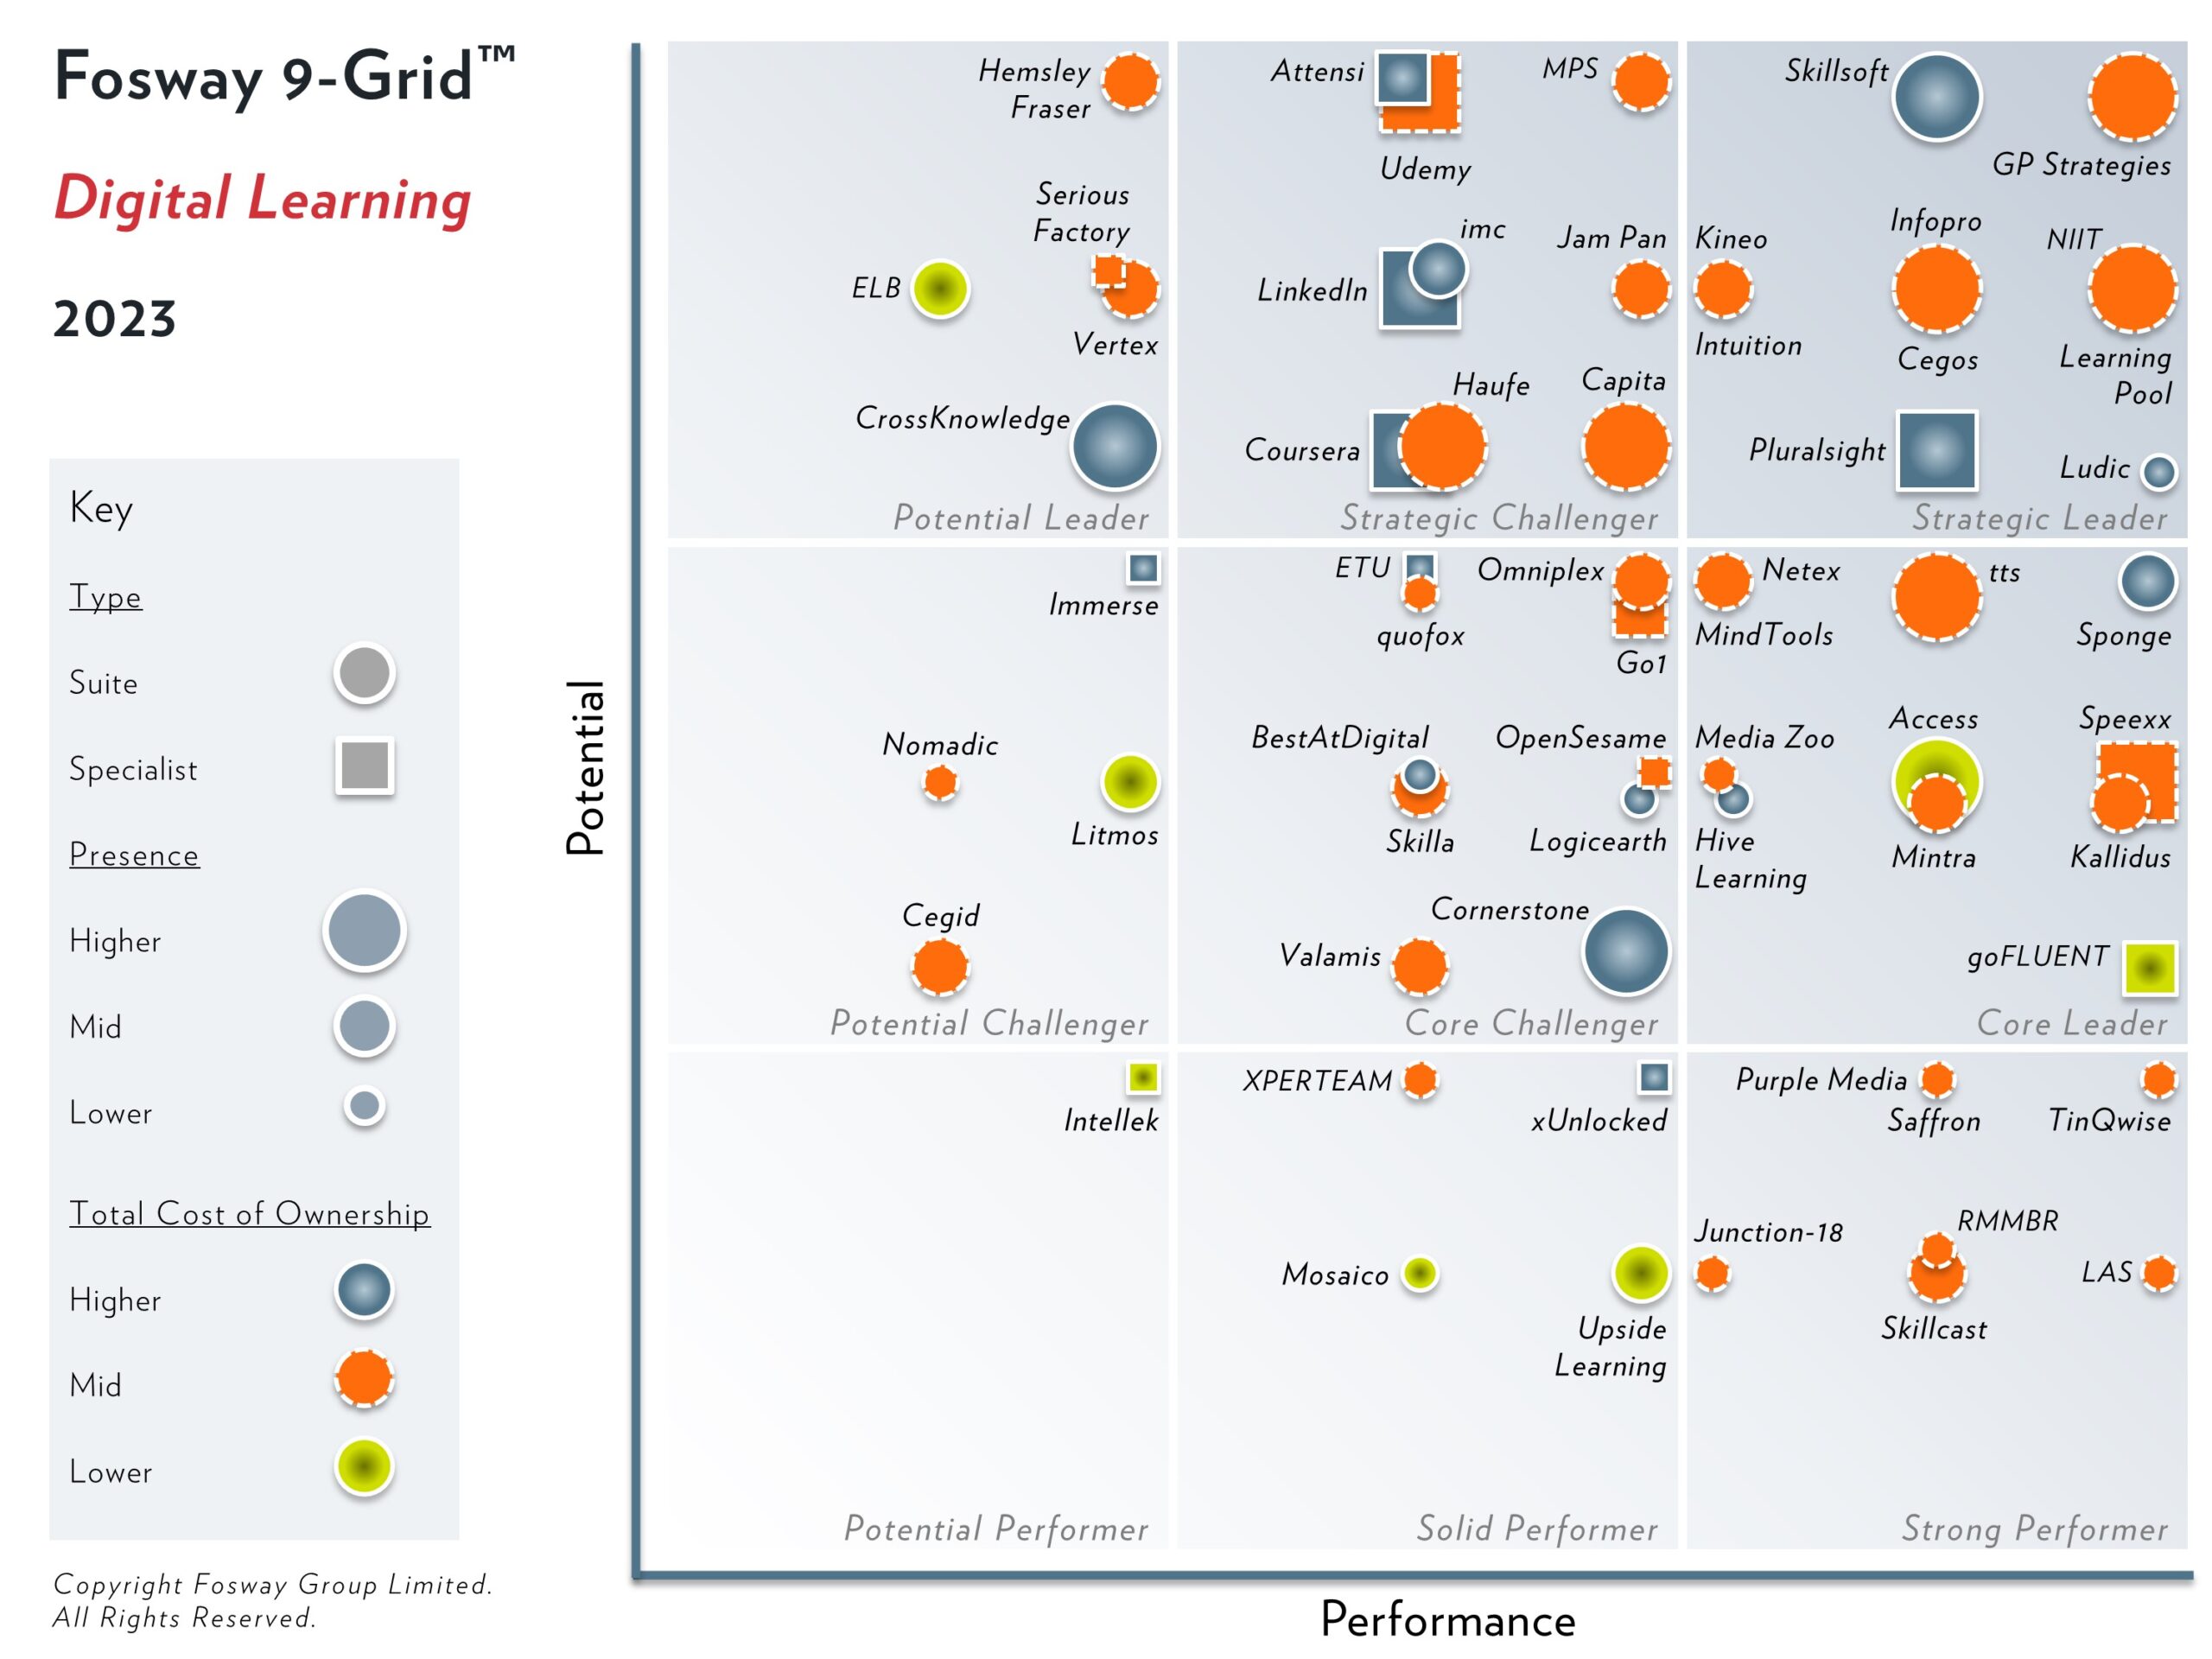 The 2023 Fosway 9-Grid™ for Digital Learning, which has named LTG, through GP Strategies, as a Strategic Leader